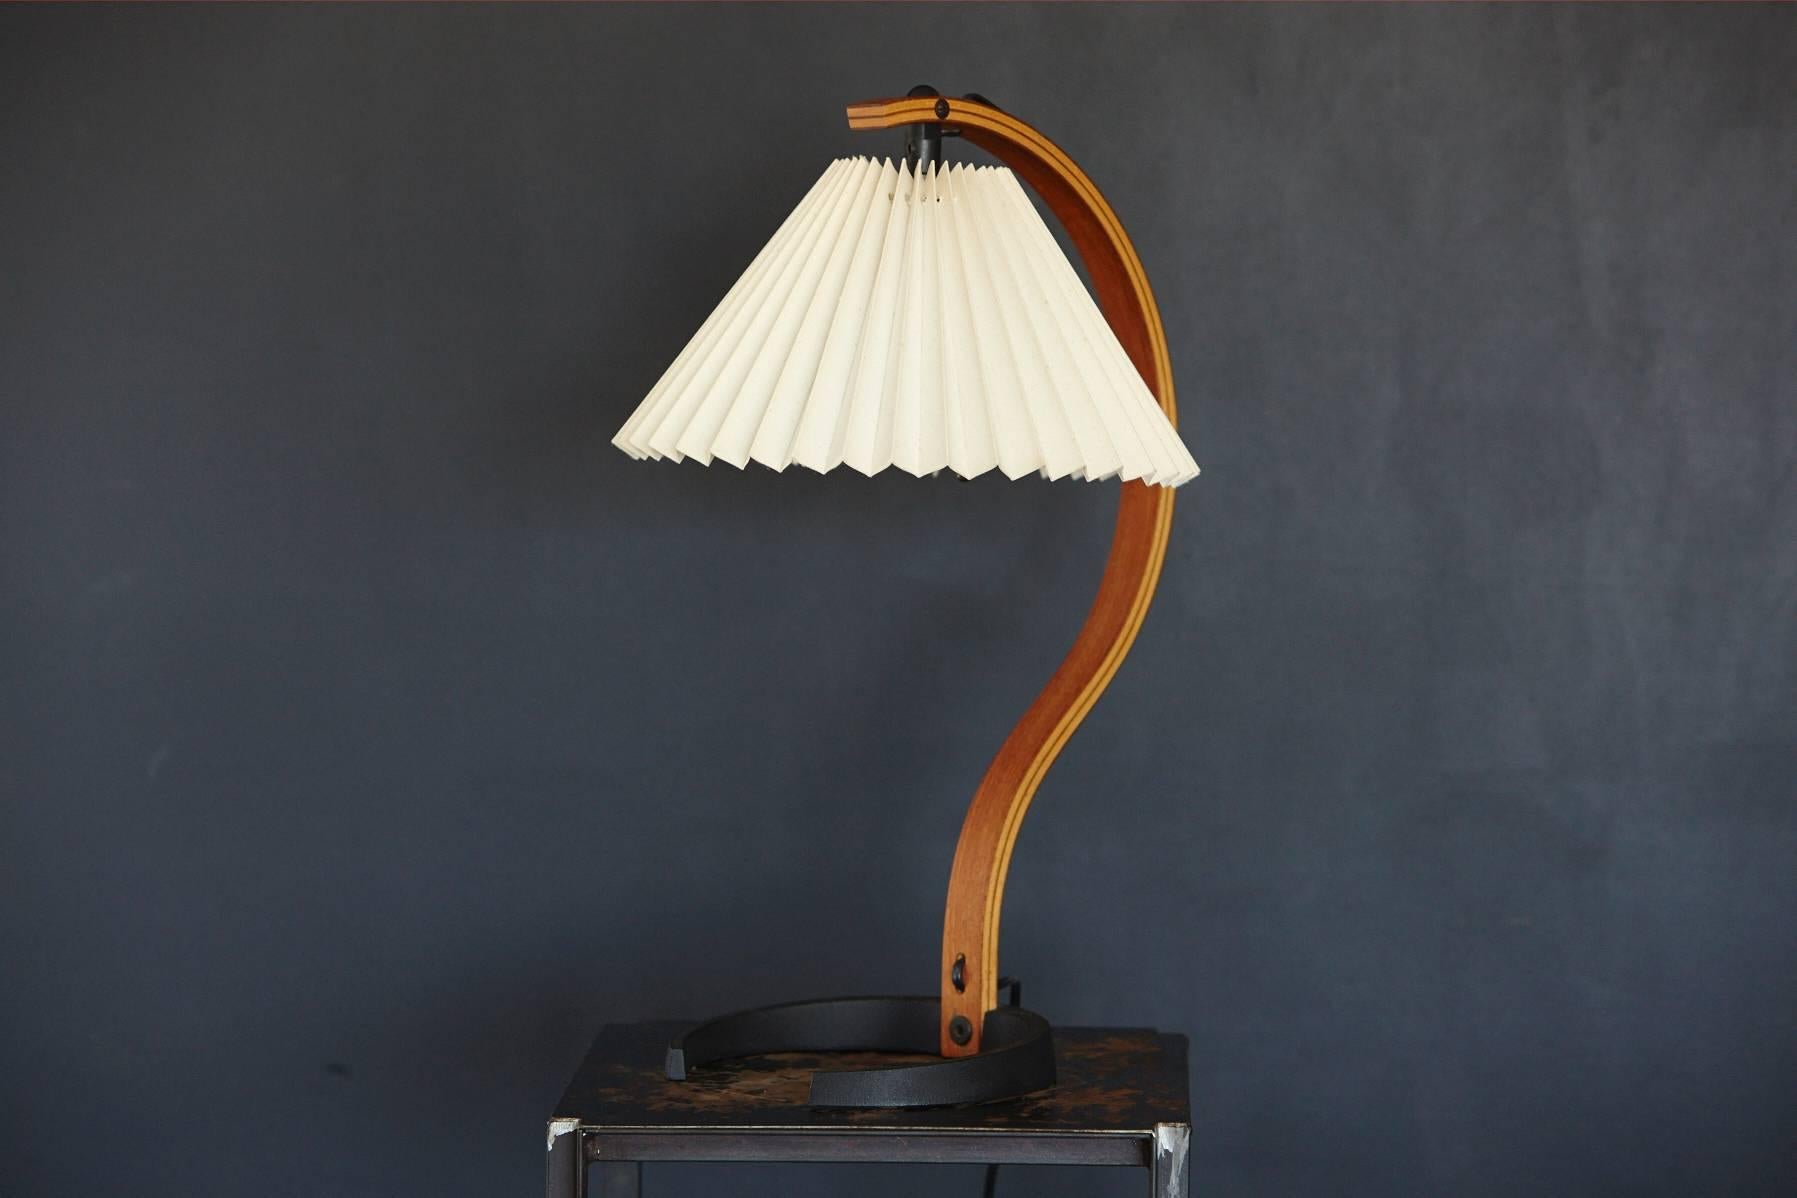 Bentwood table lamp with original pleated lampshade designed by Mads Caprani. Beautiful fluid, sculptural birch frame embracing the cream colored pleated, accordion lamp shade and ending in a crescent shaped black cast iron base. Original sticker